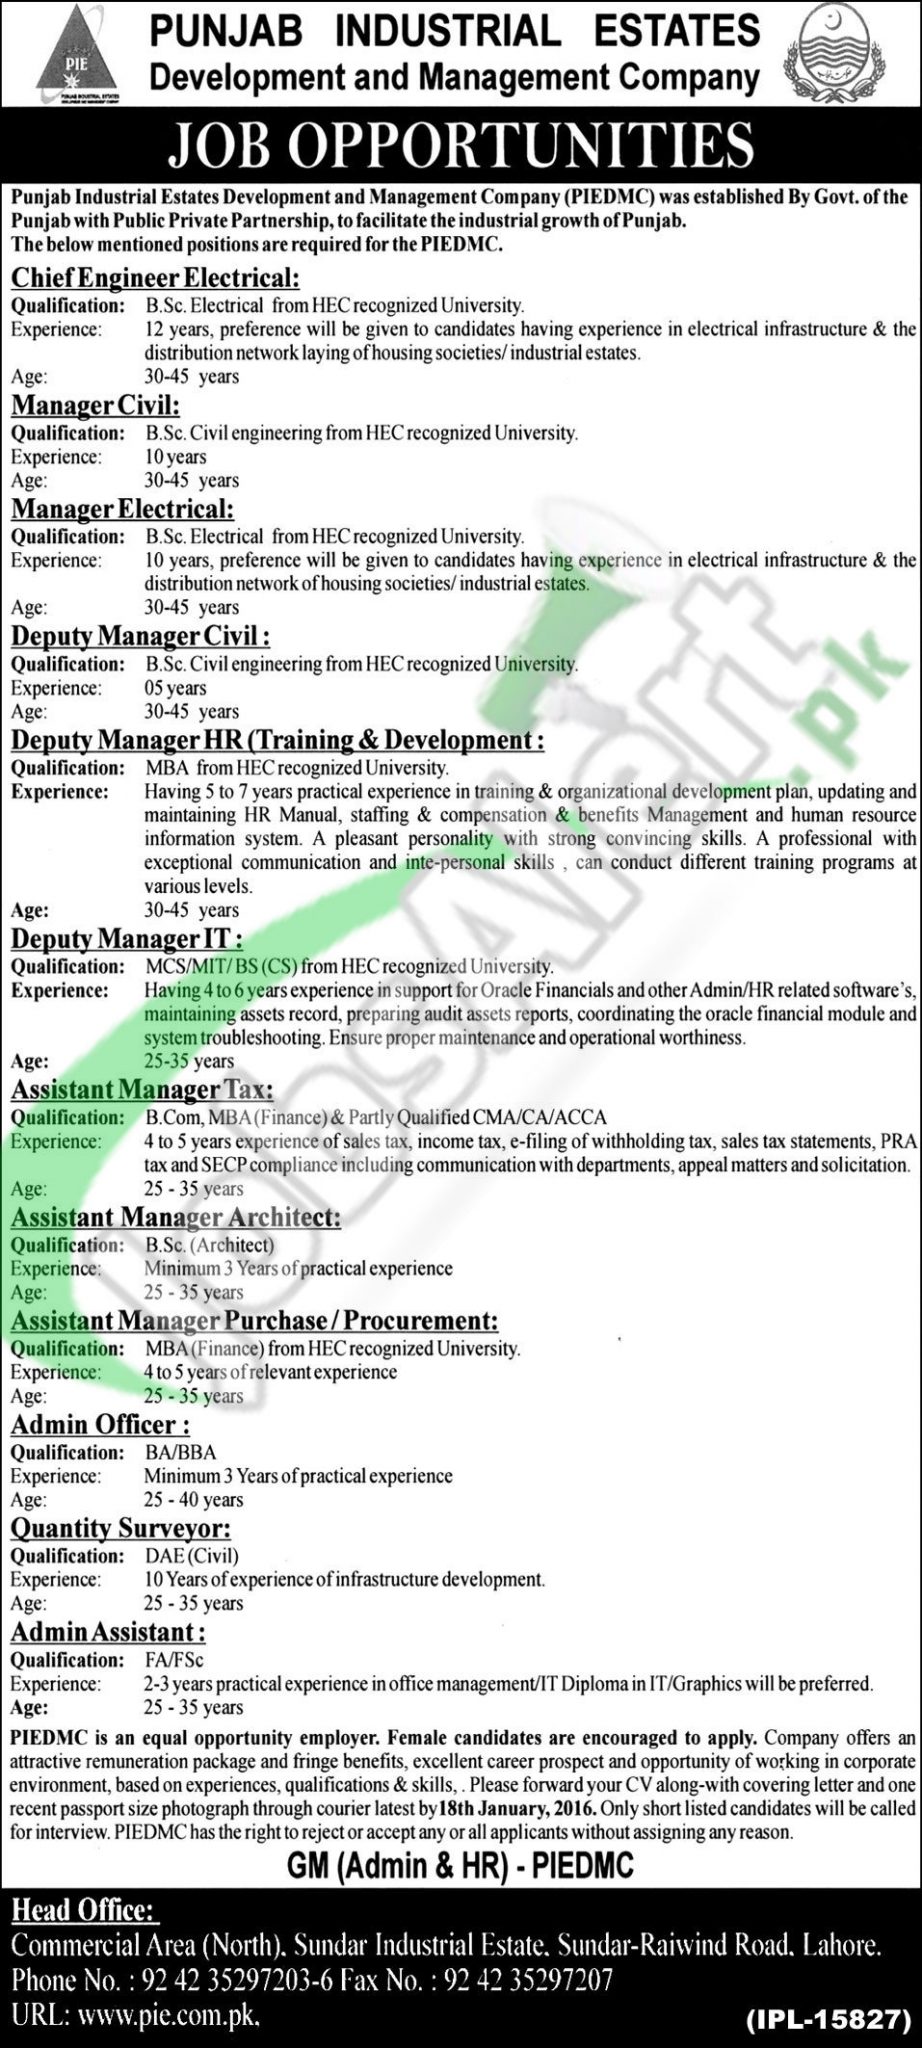 Career Opportunities in Punjab Industrial Estate Development and Management Company